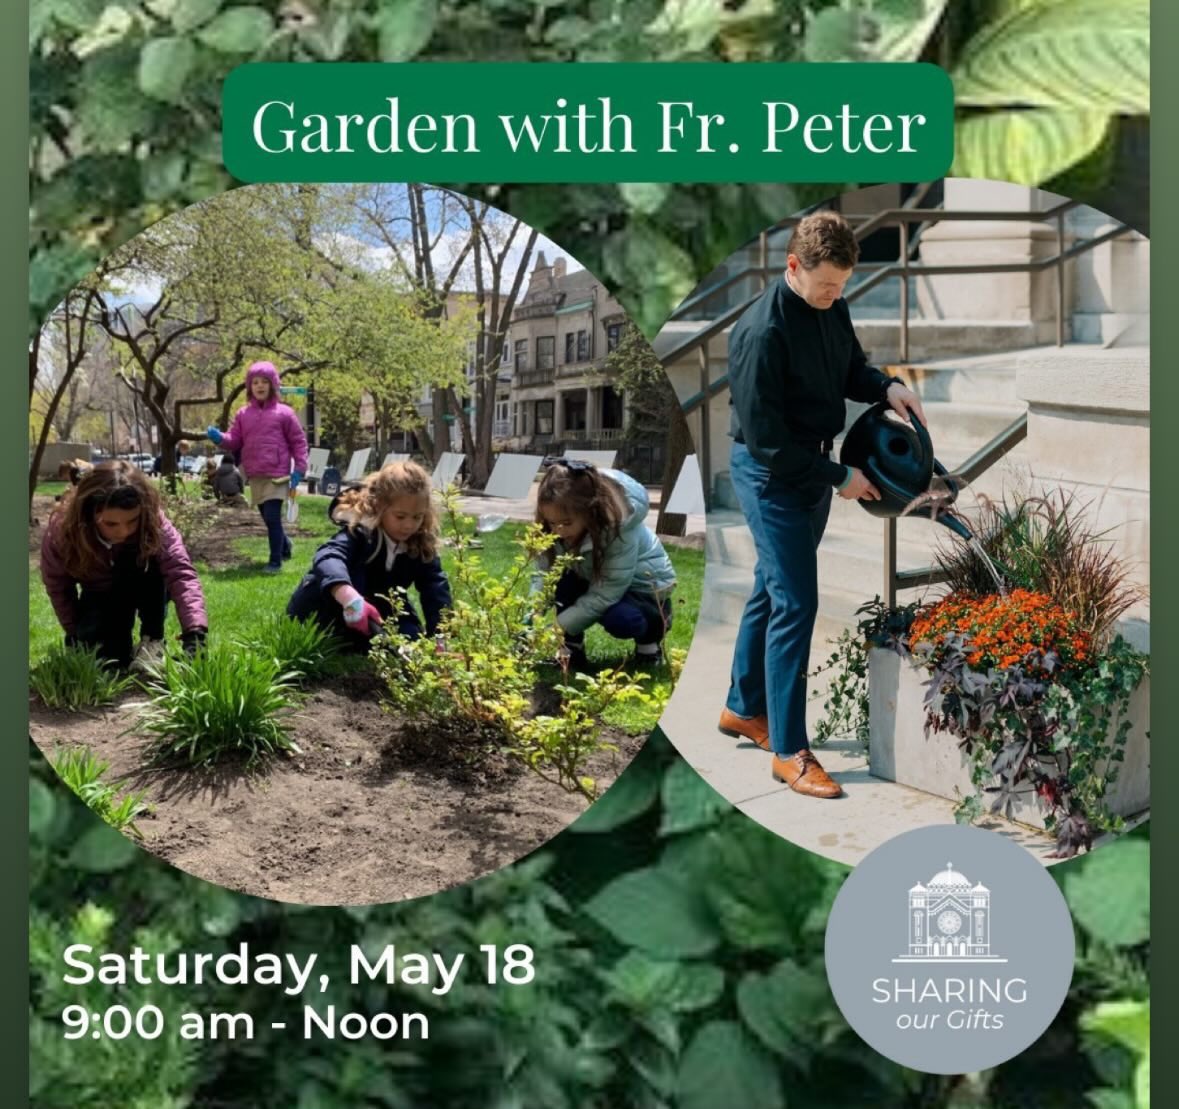 I hope you can join me for our annual planting party @StClement! Visit clement.org to register and join the fun!